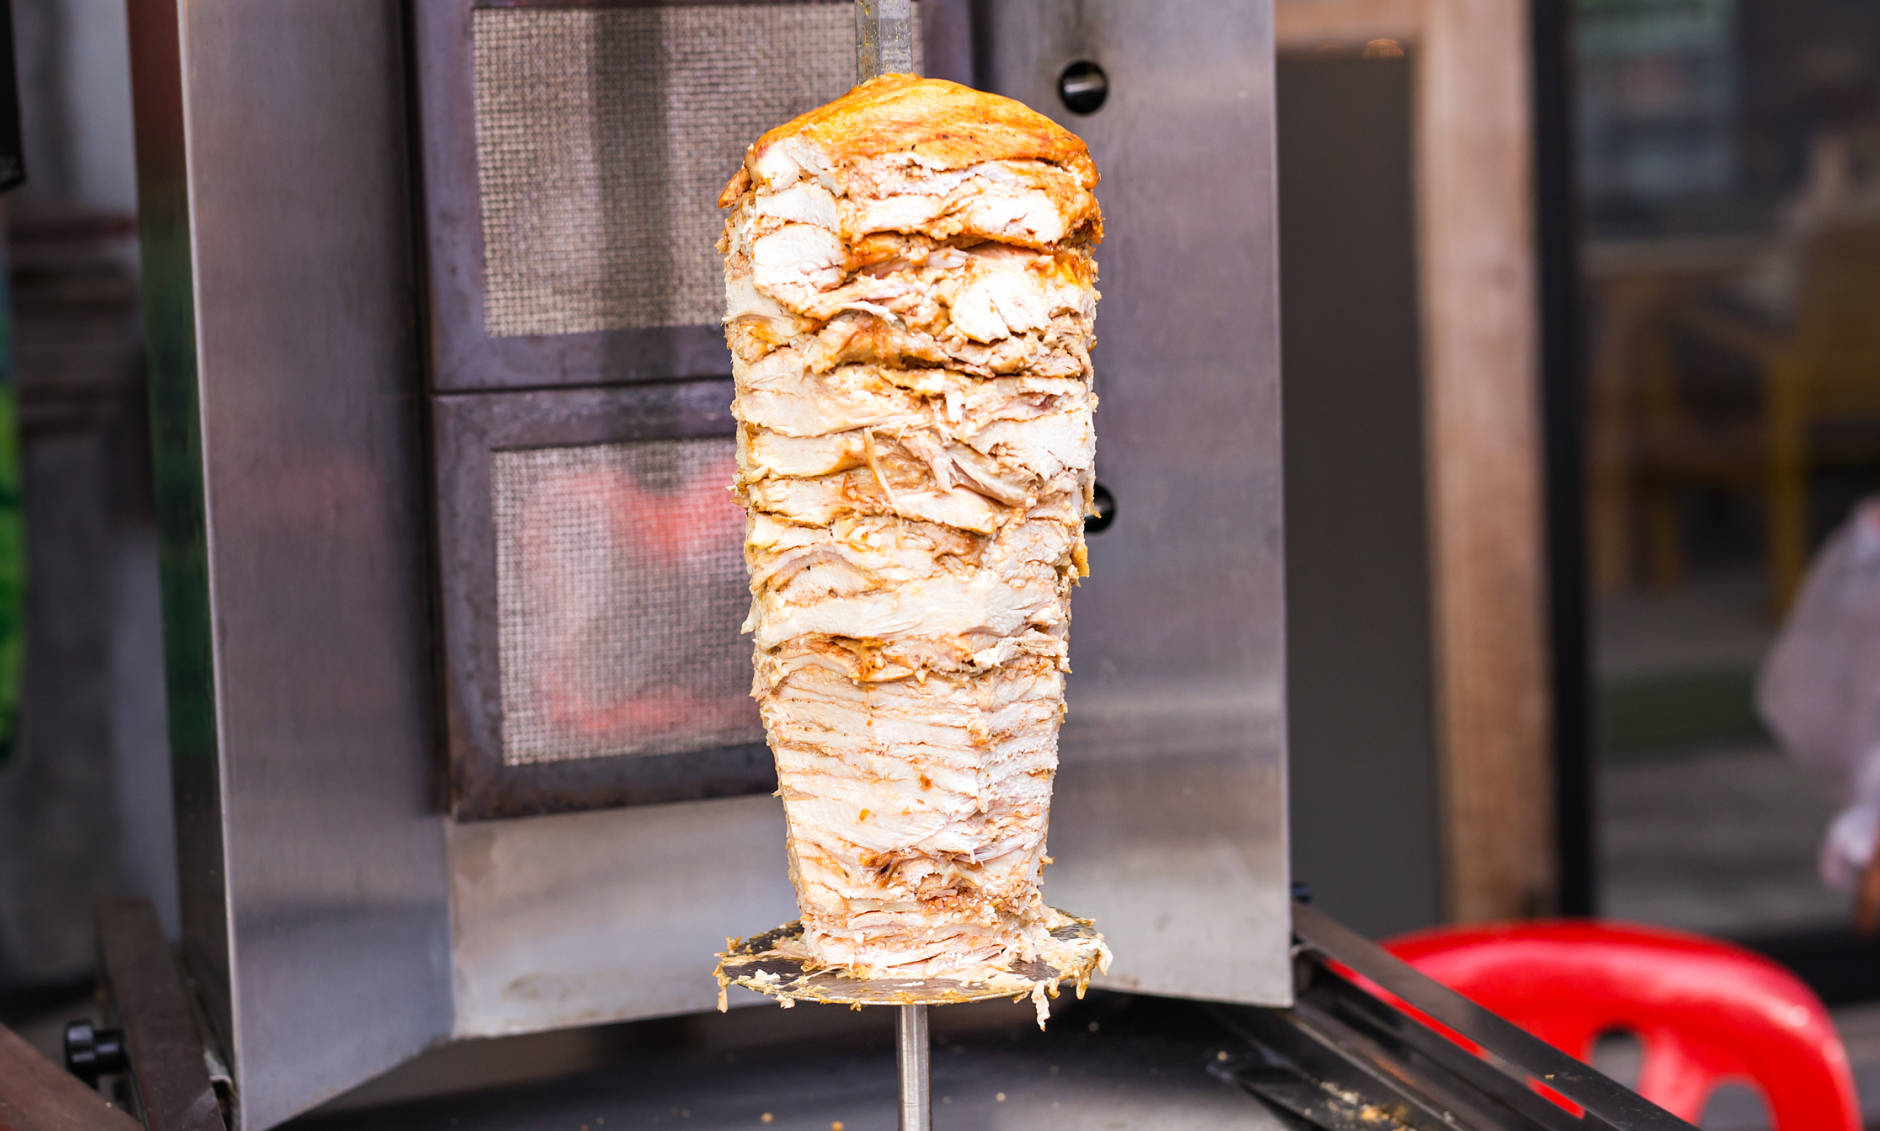 Delicious slabs of skewered fast food shawerma chicken and lamb meat turn side by side on a spit. This is common sandwich meat found in fast food in the Middle East.